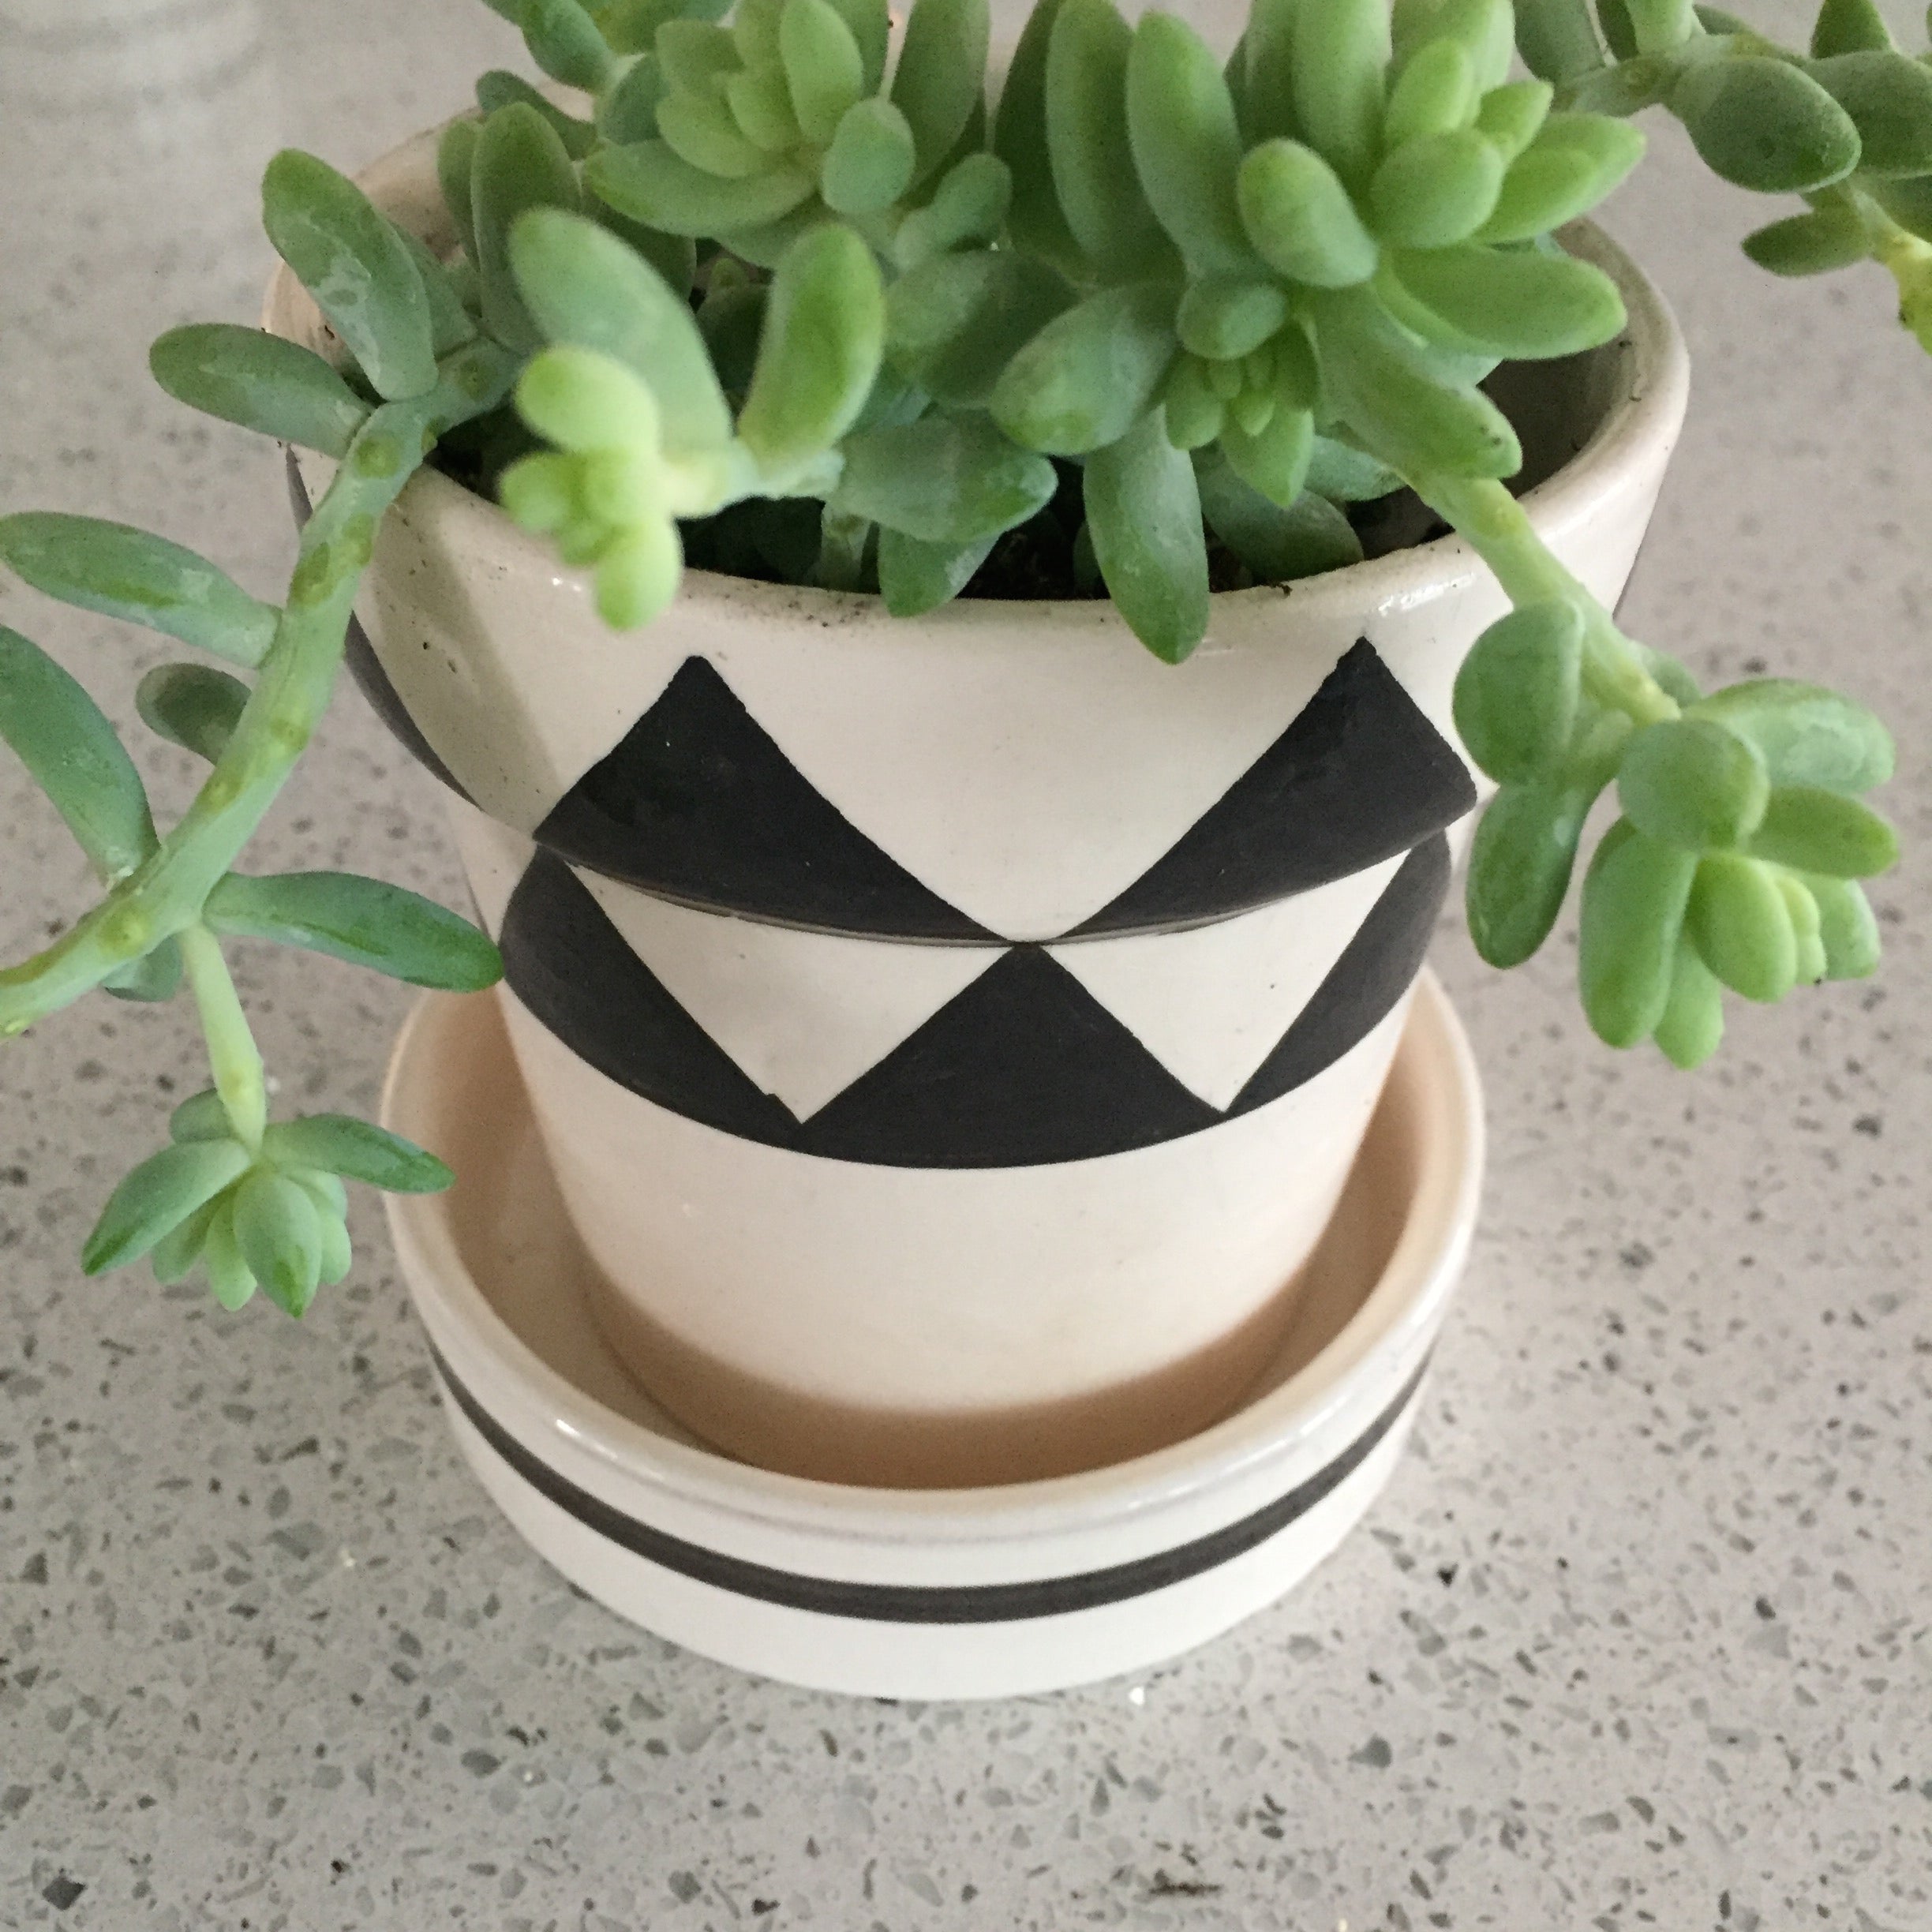 GRAPHIC PLANTER set of 2 with triangles and horizontal stripes